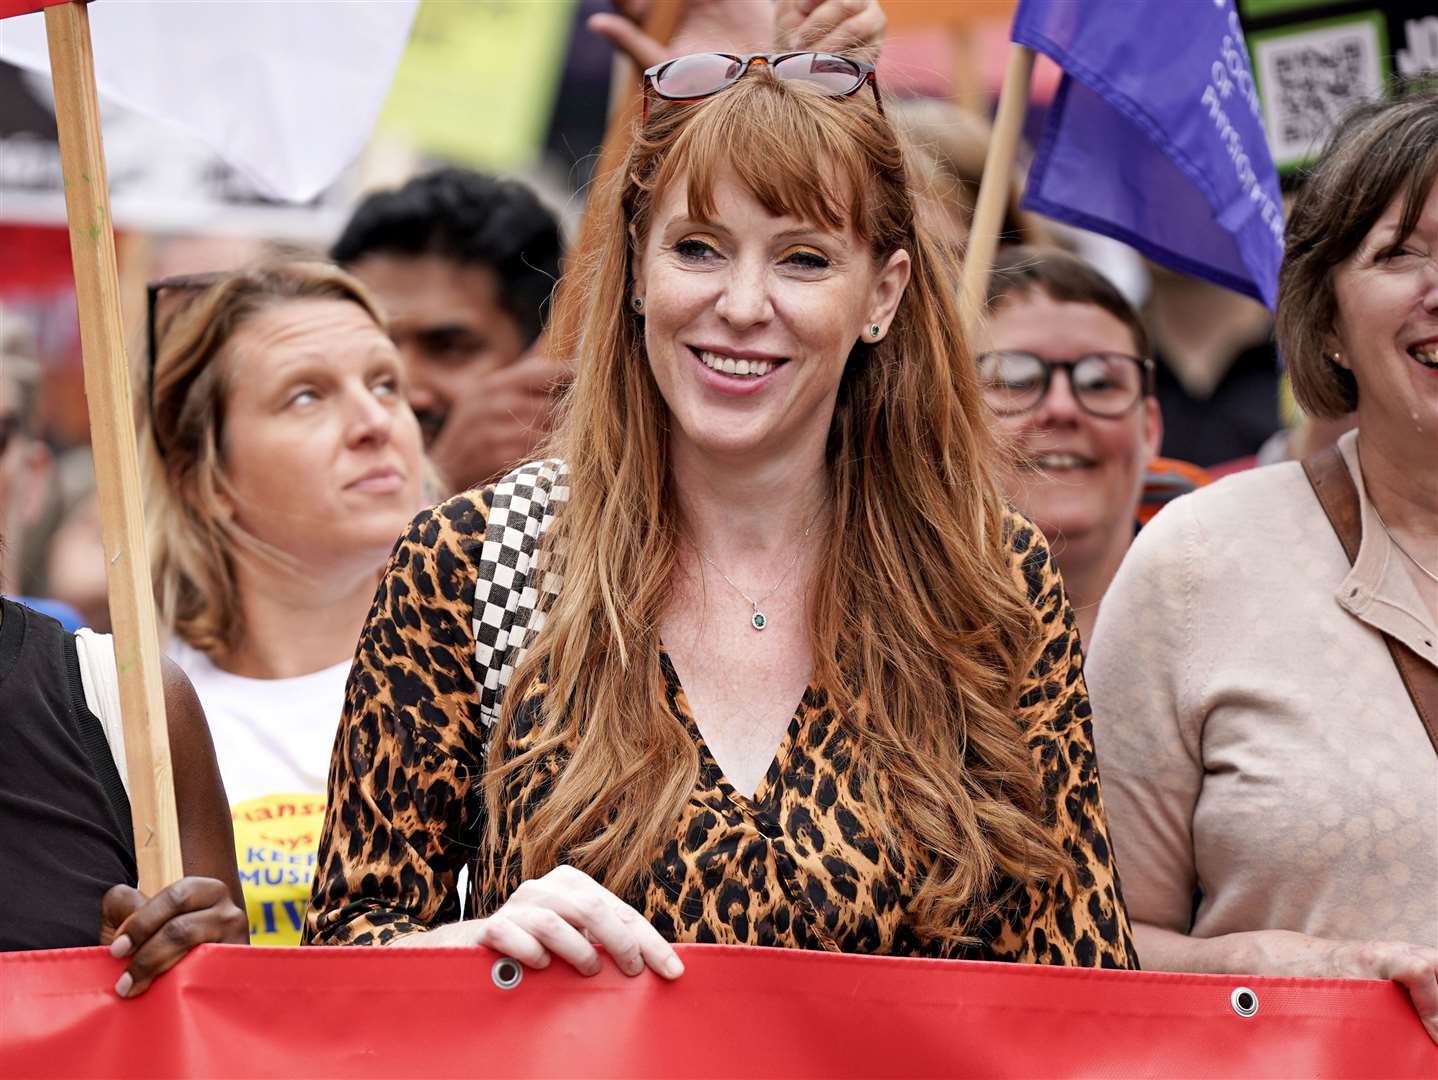 Labour Party deputy leader Angela Rayner joined the rally (Yui Mok/PA Wire)